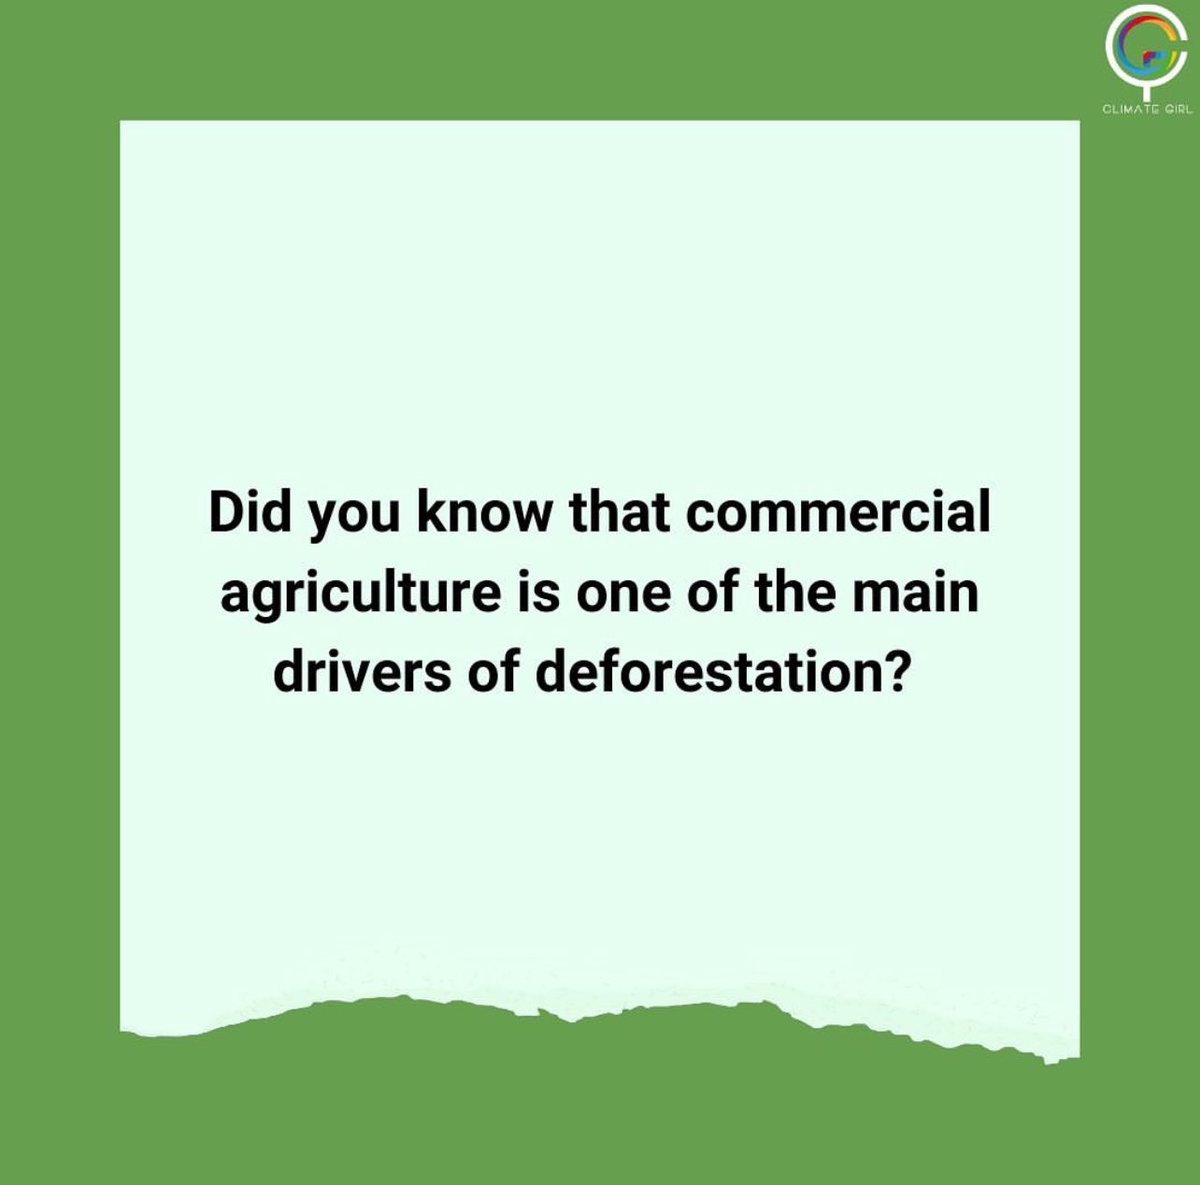 Commercial agriculture fuels deforestation! 🌳🚜 Demand for palm oil, soy, and beef drives forest loss. Choose sustainability! #DeforestationCause #SustainableAgriculture #climategirlnft #ravenspirit #peakpeekstore #tagethernet